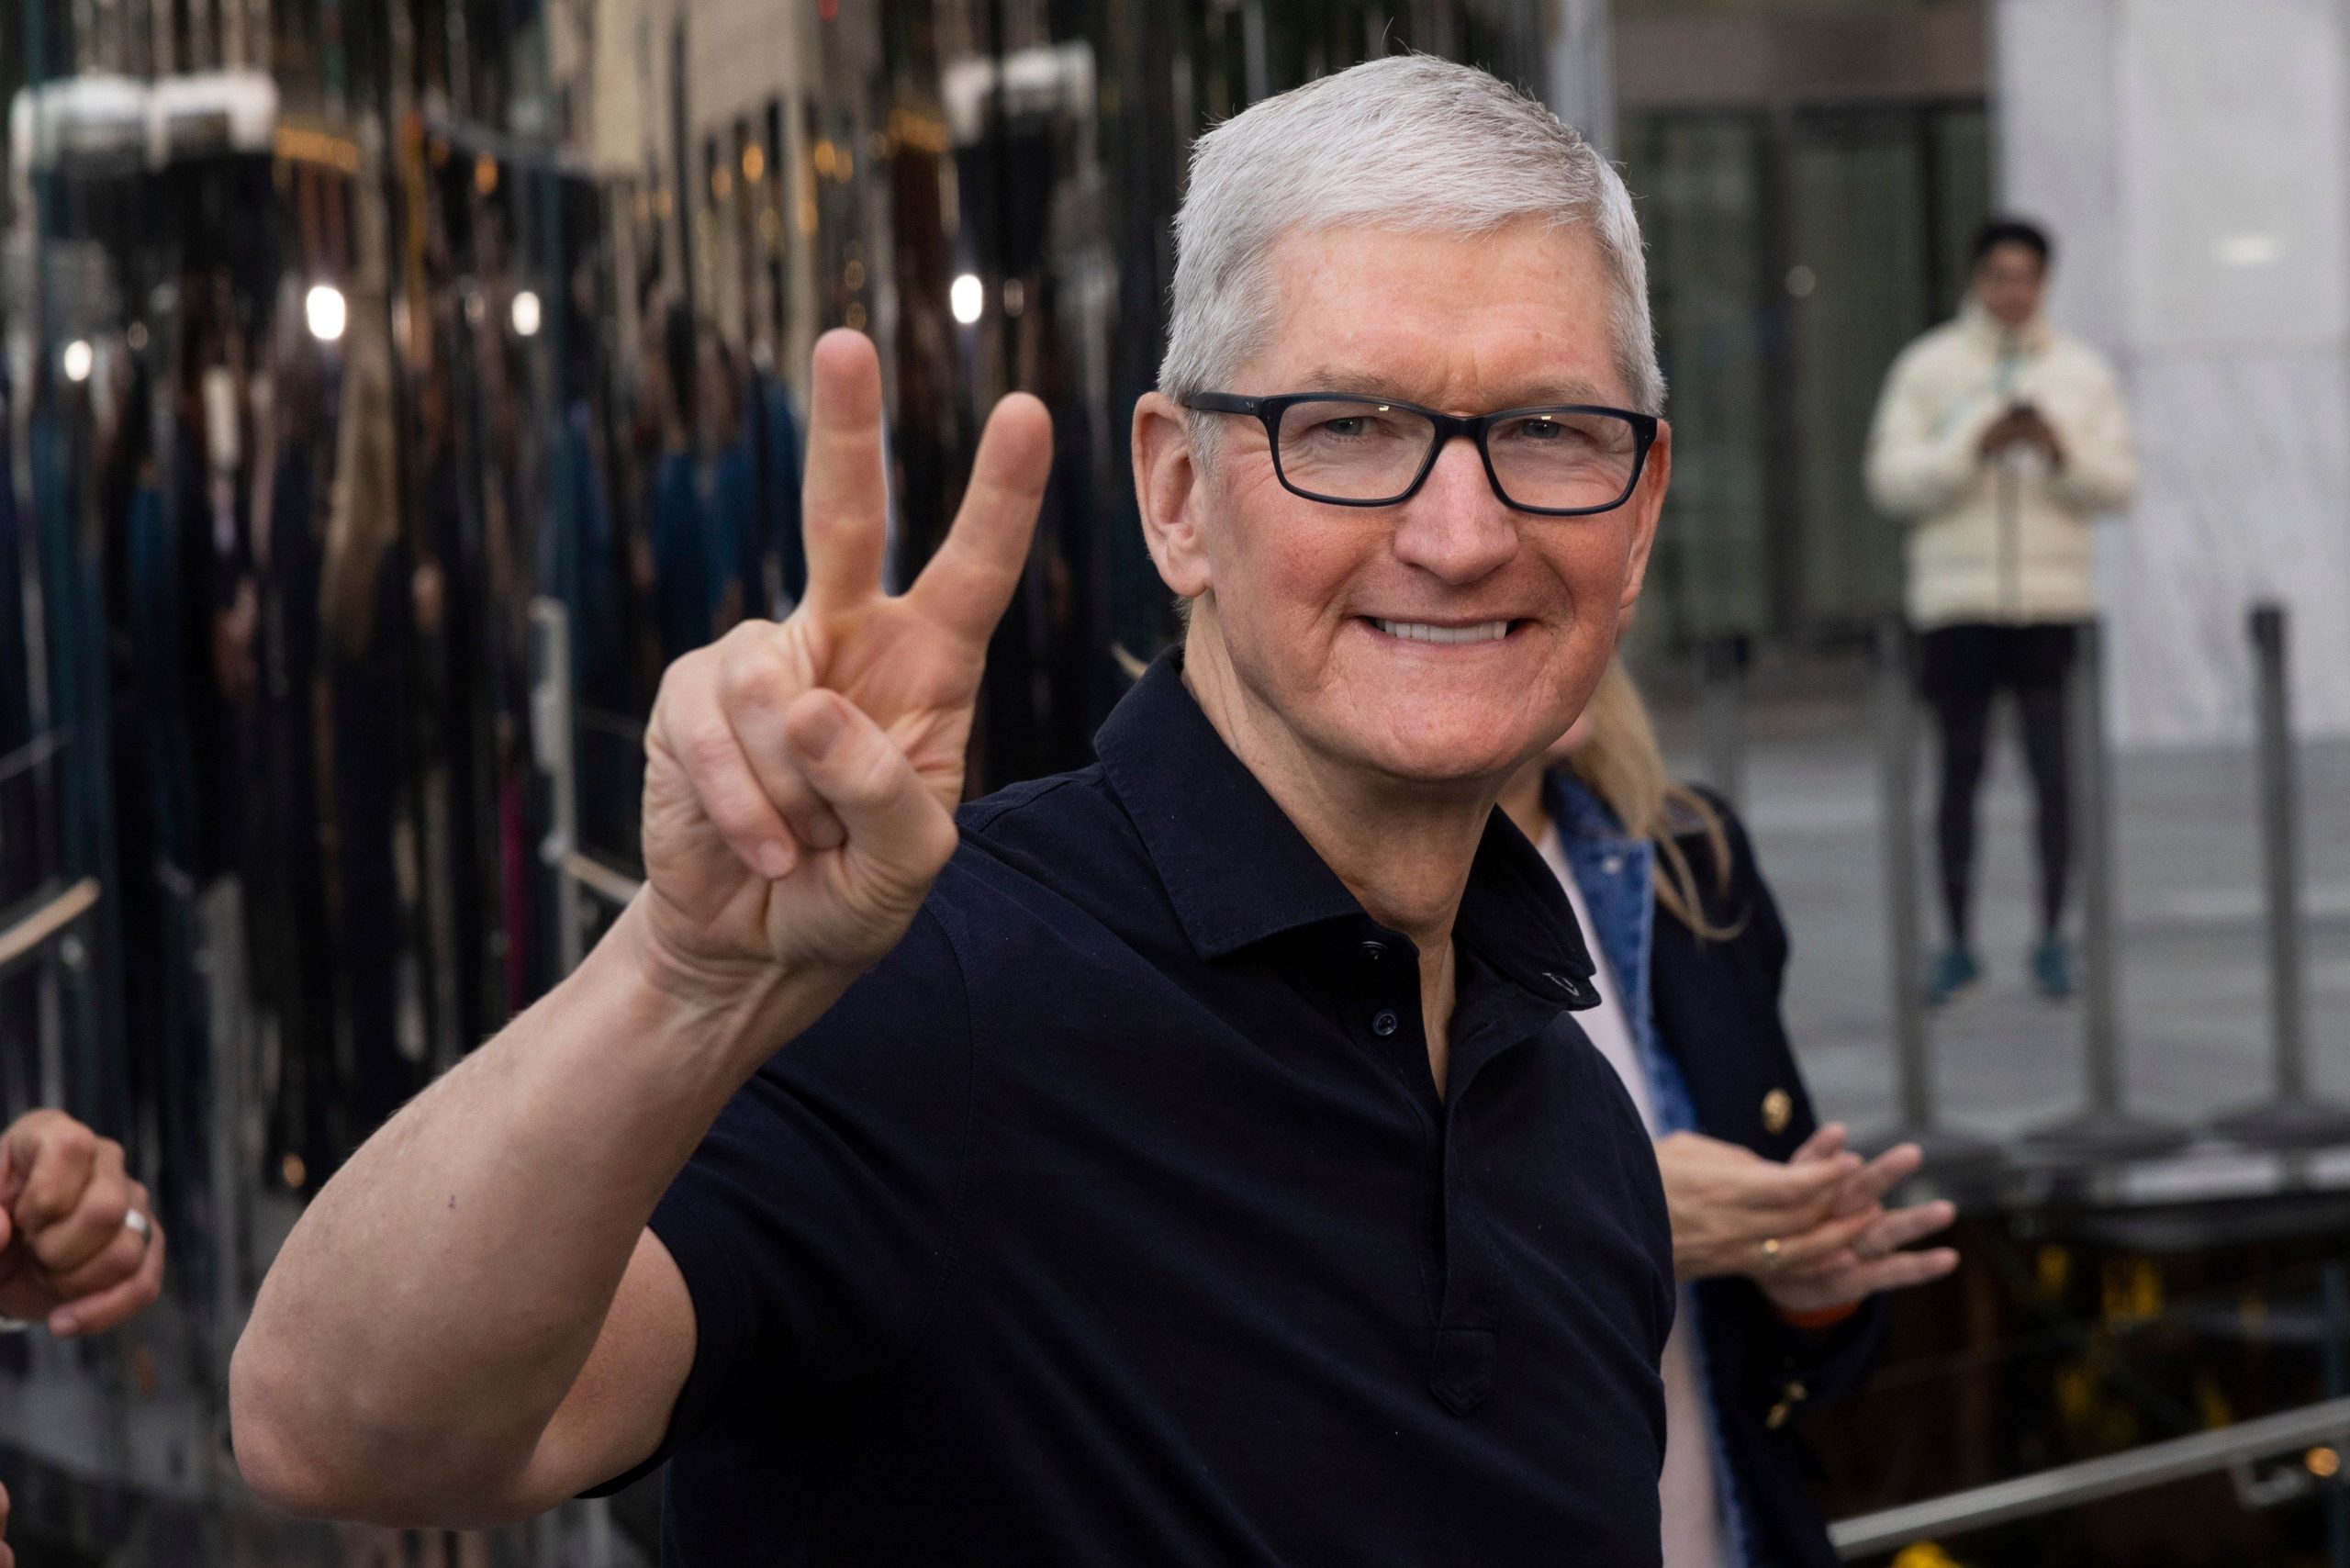 Who is Tim Cook?